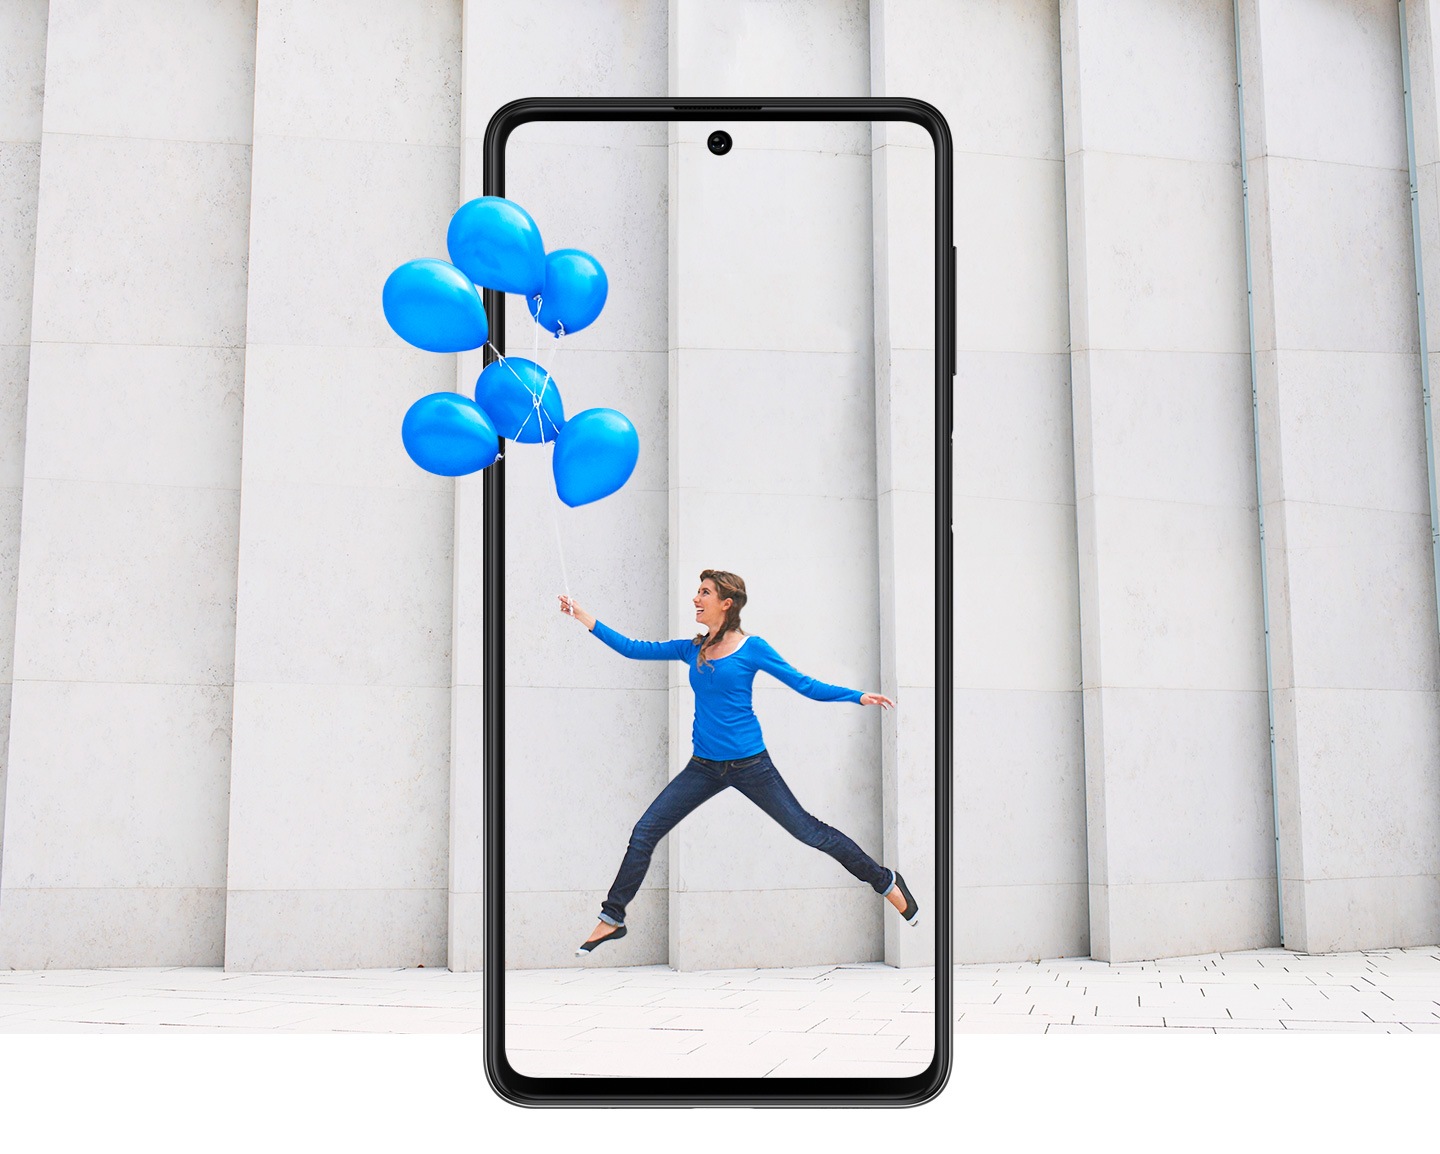 A girl wearing blue clothes is holding blue balloons, jumping up in motion captured in Galaxy M62 infinity-O display.